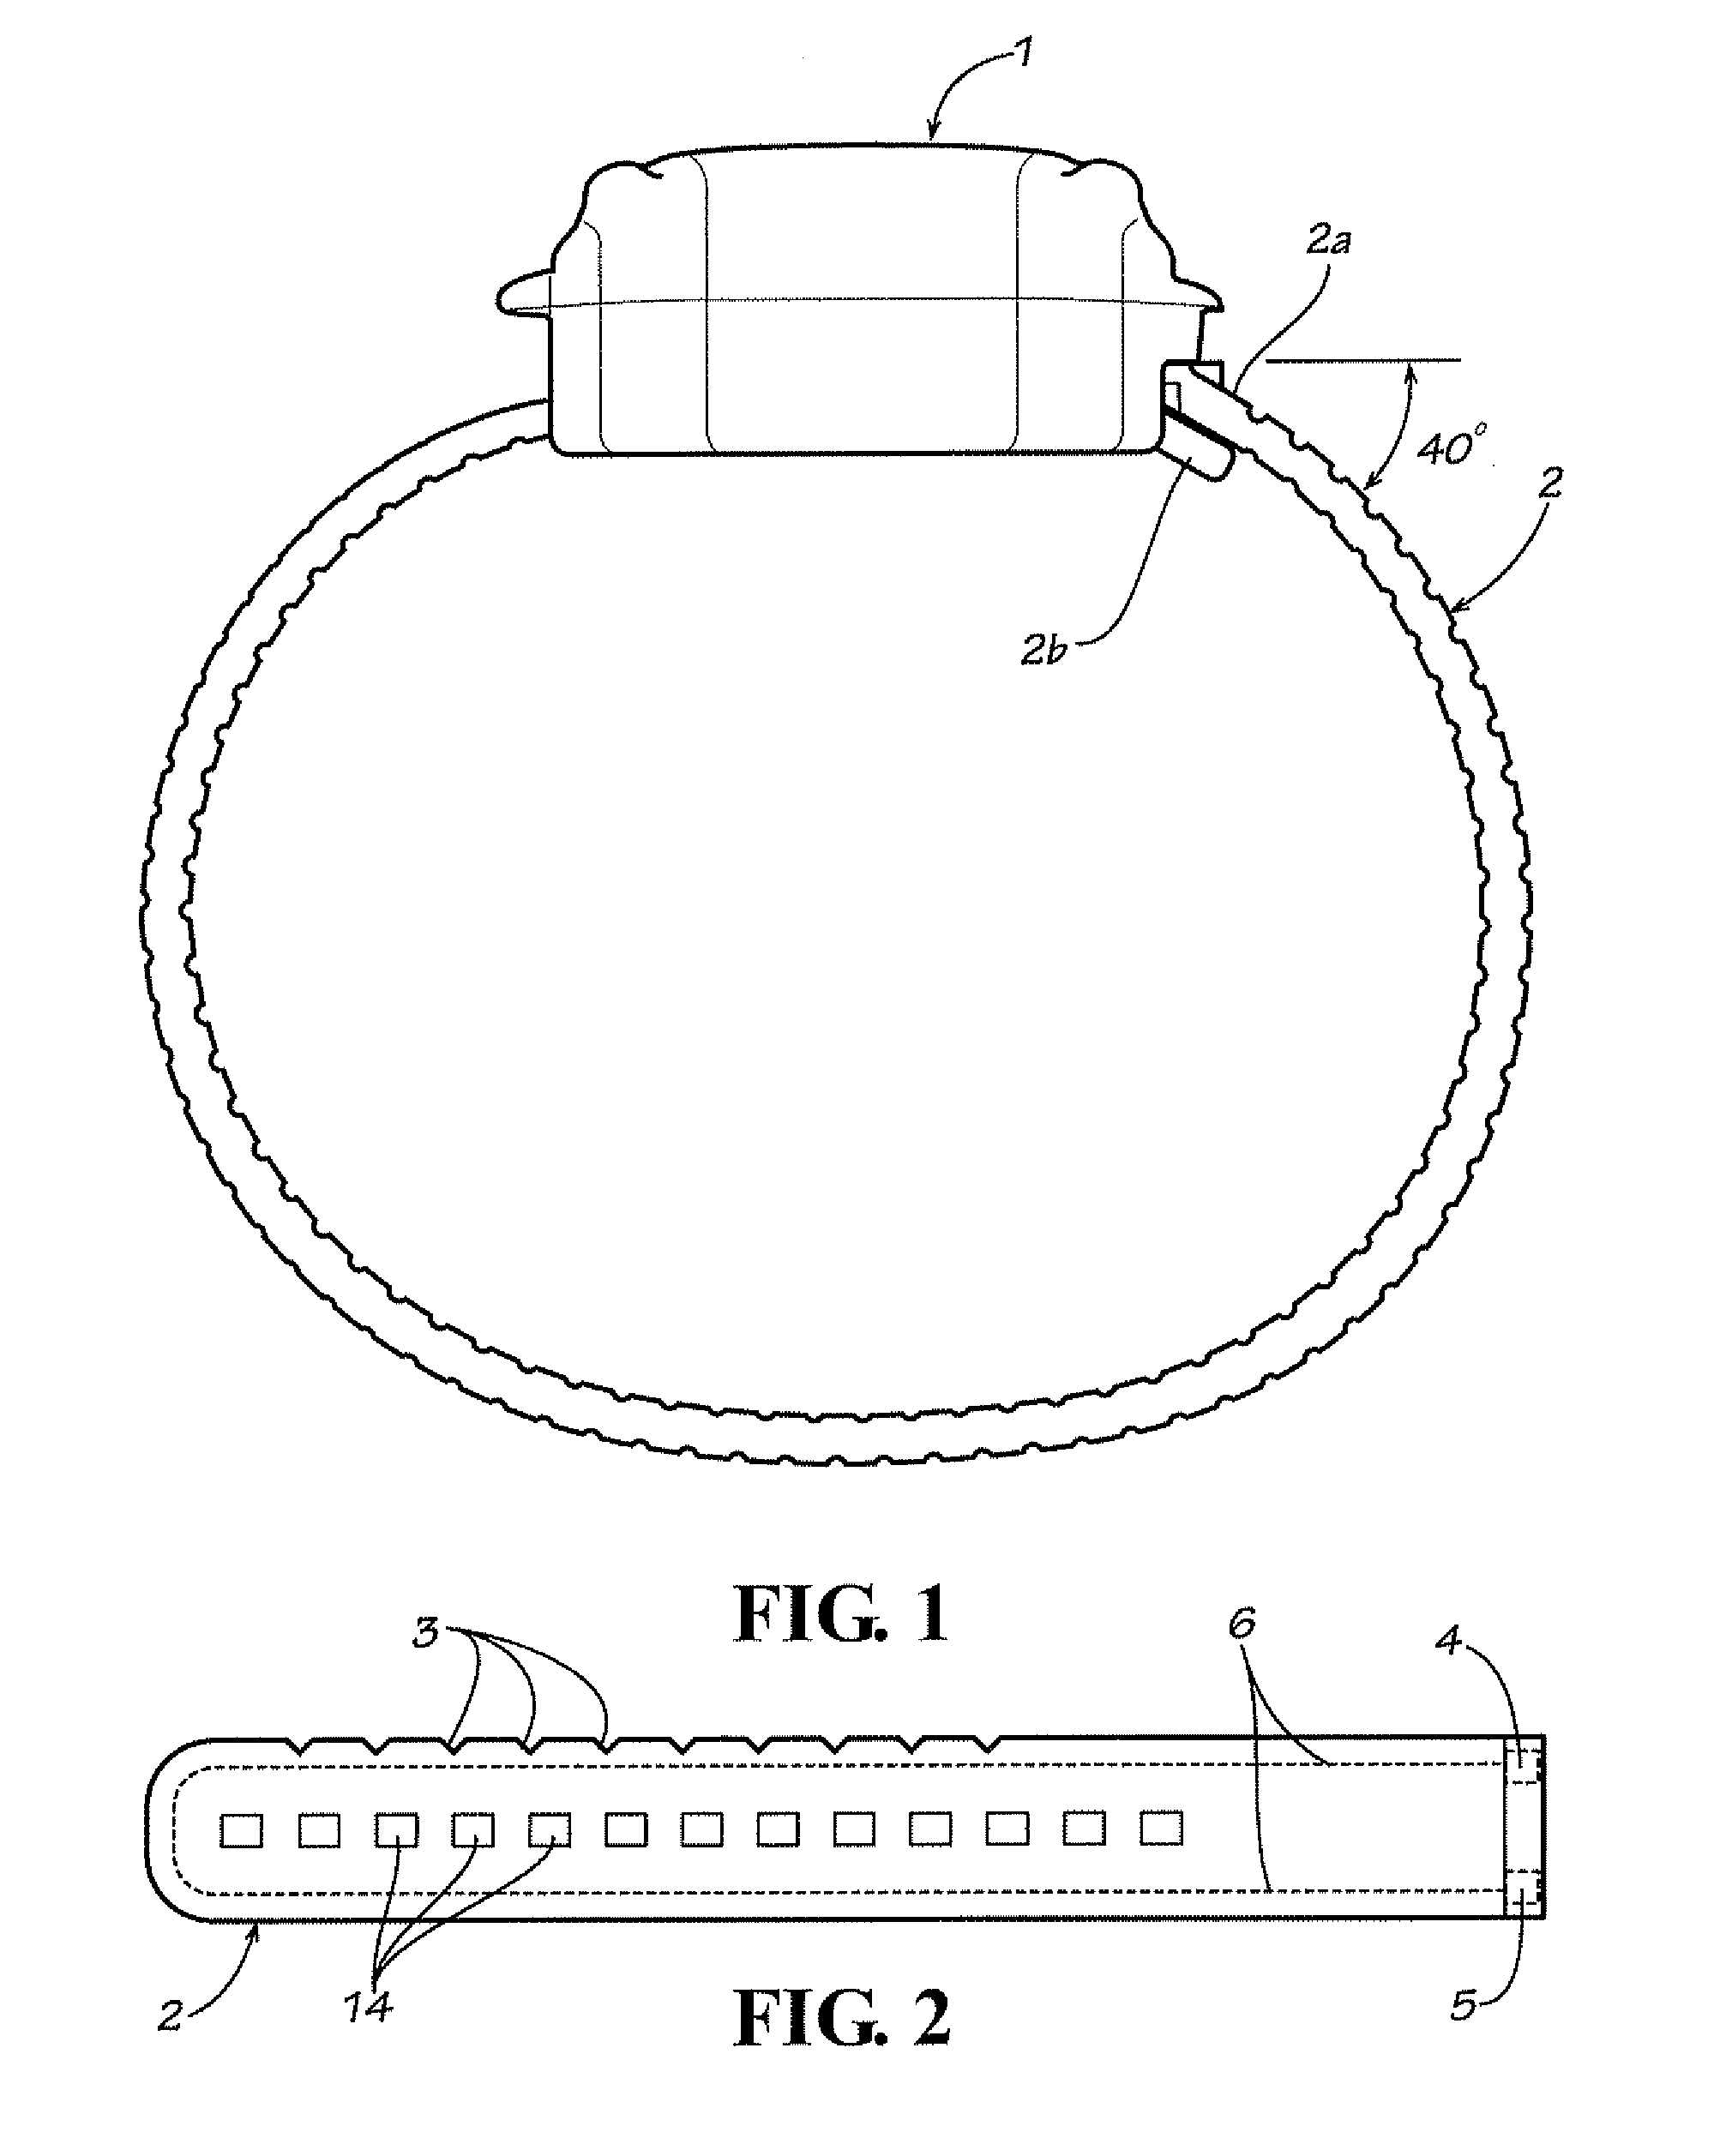 Tamper detection system for use with personal monitoring devices